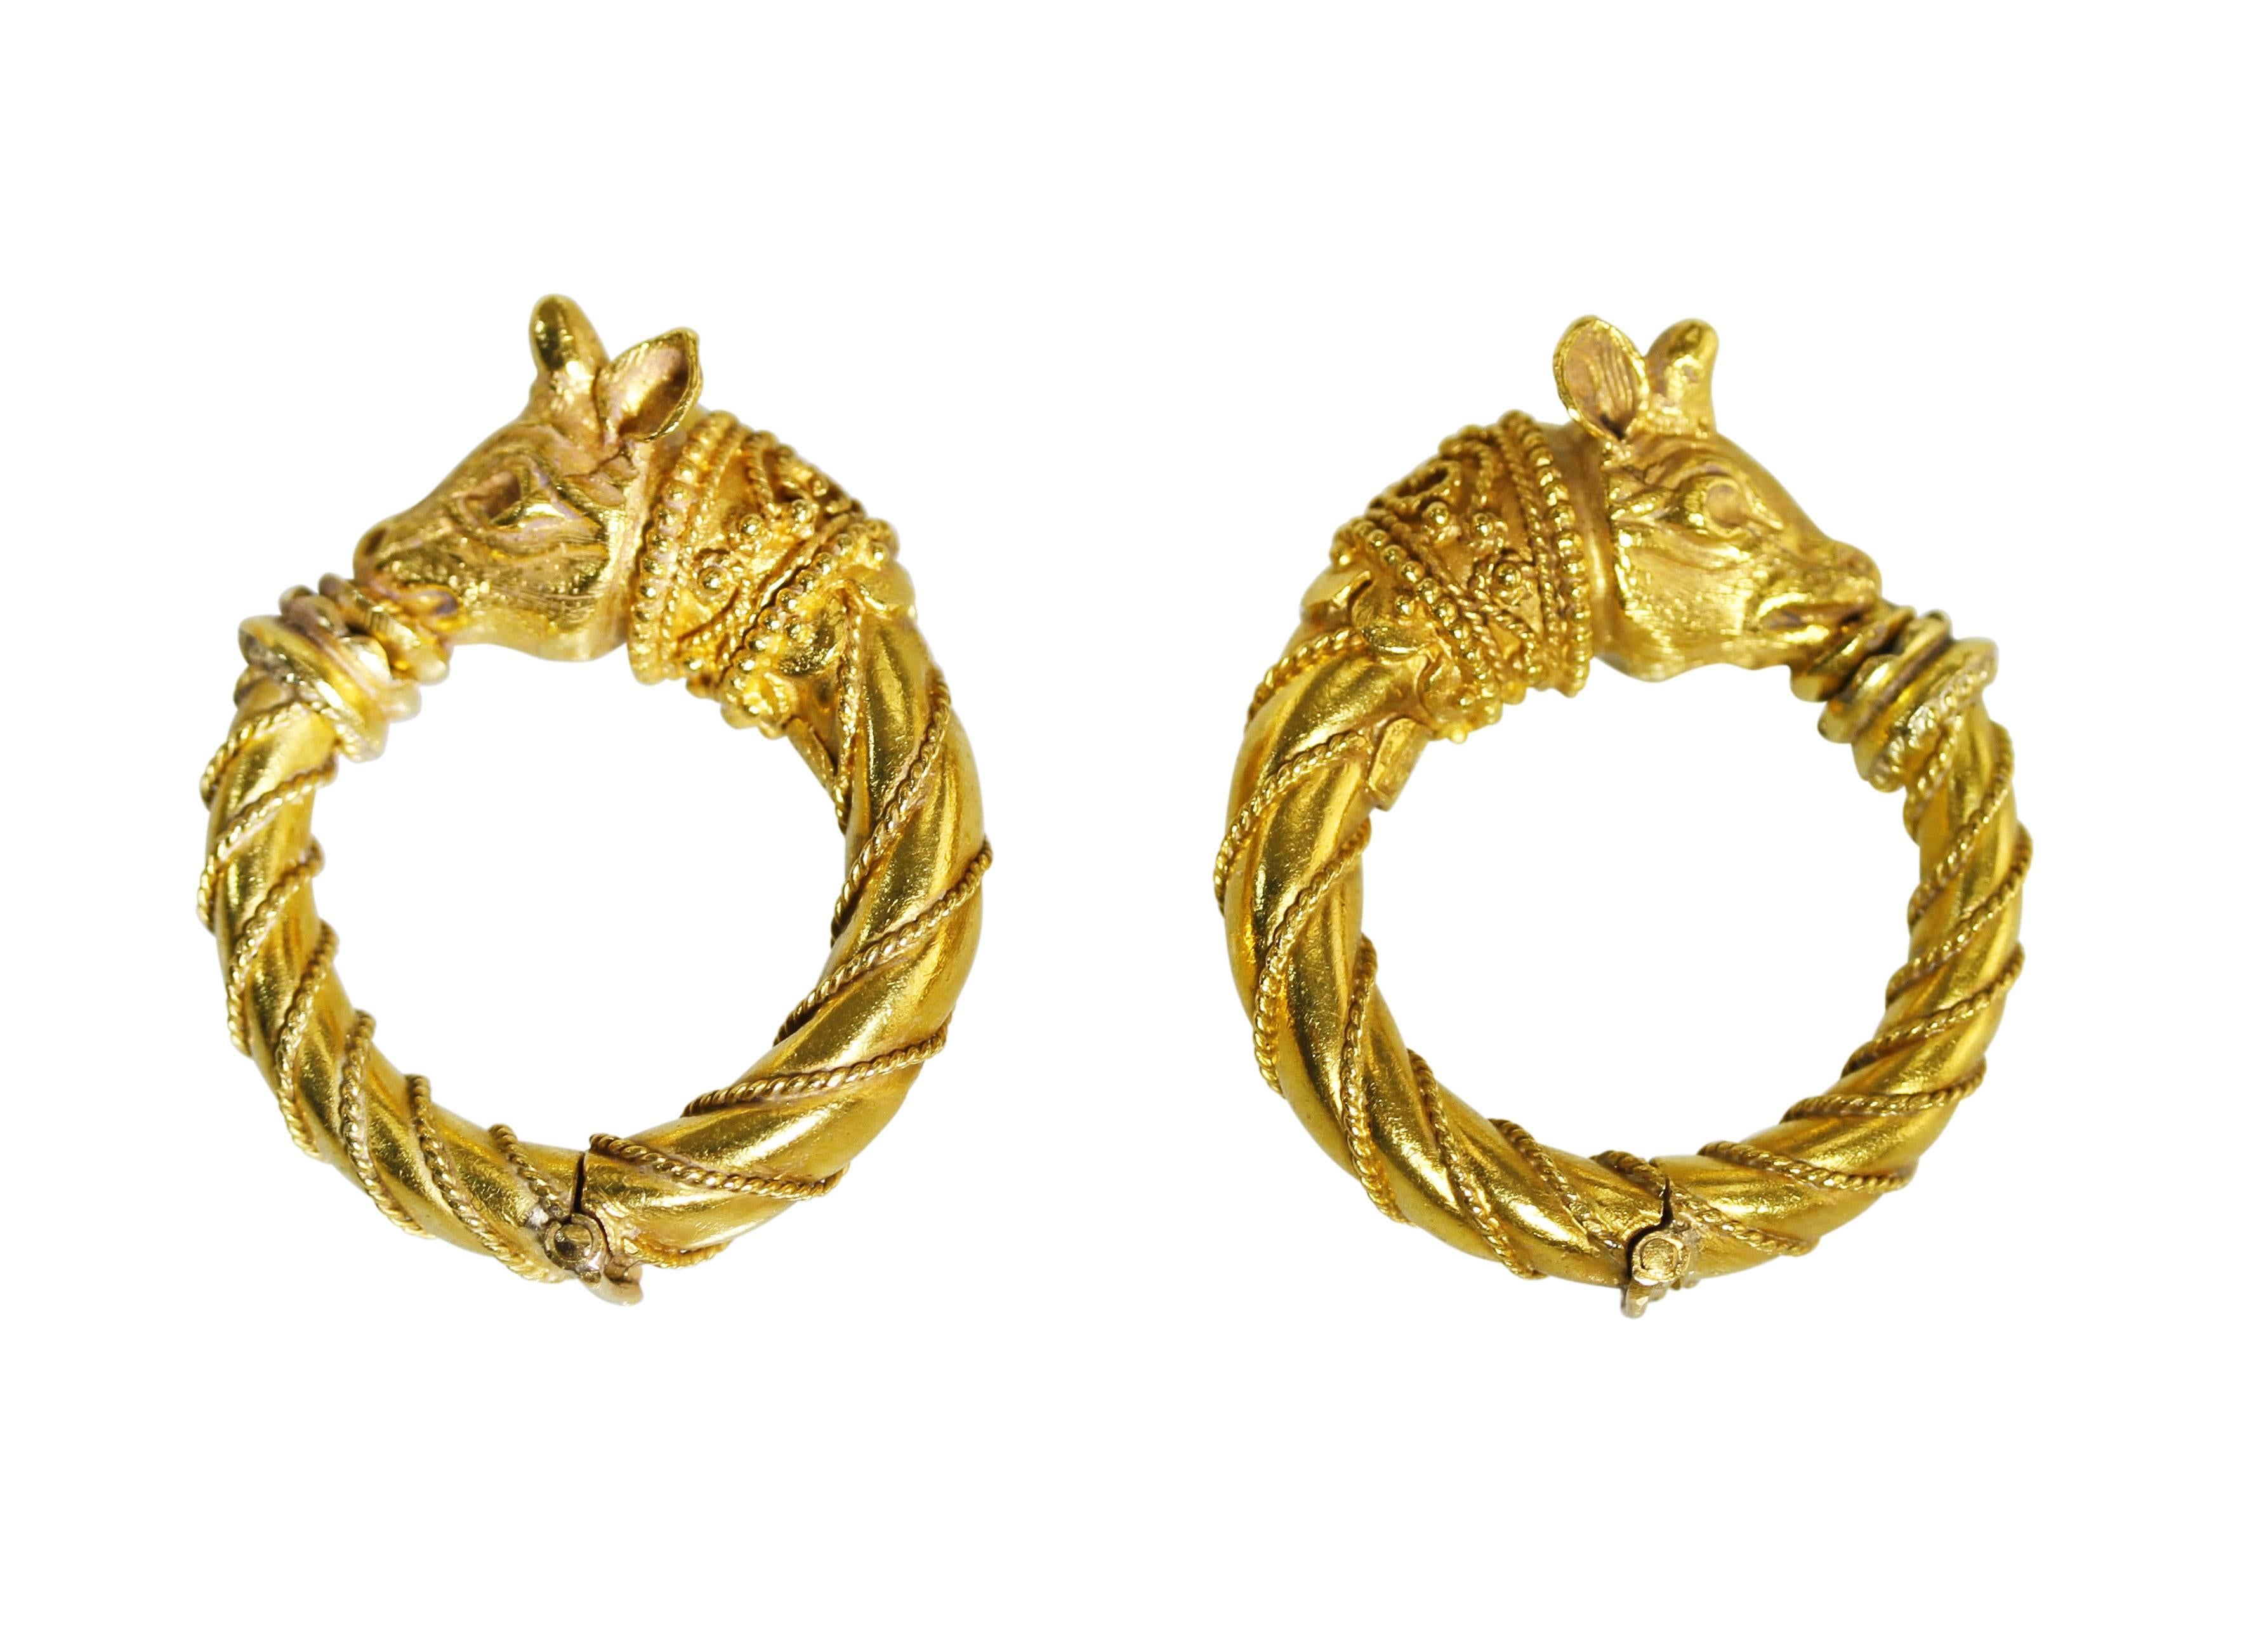 A pair of 22 karat gold hoop earclips by Zolotas, Greece, each hinged hoop with a bull's head motif, measuring 1 1/4 by 3/8 by 1 inch, gross weight 22.9 grams, with makers mark, stamped K22, A57.